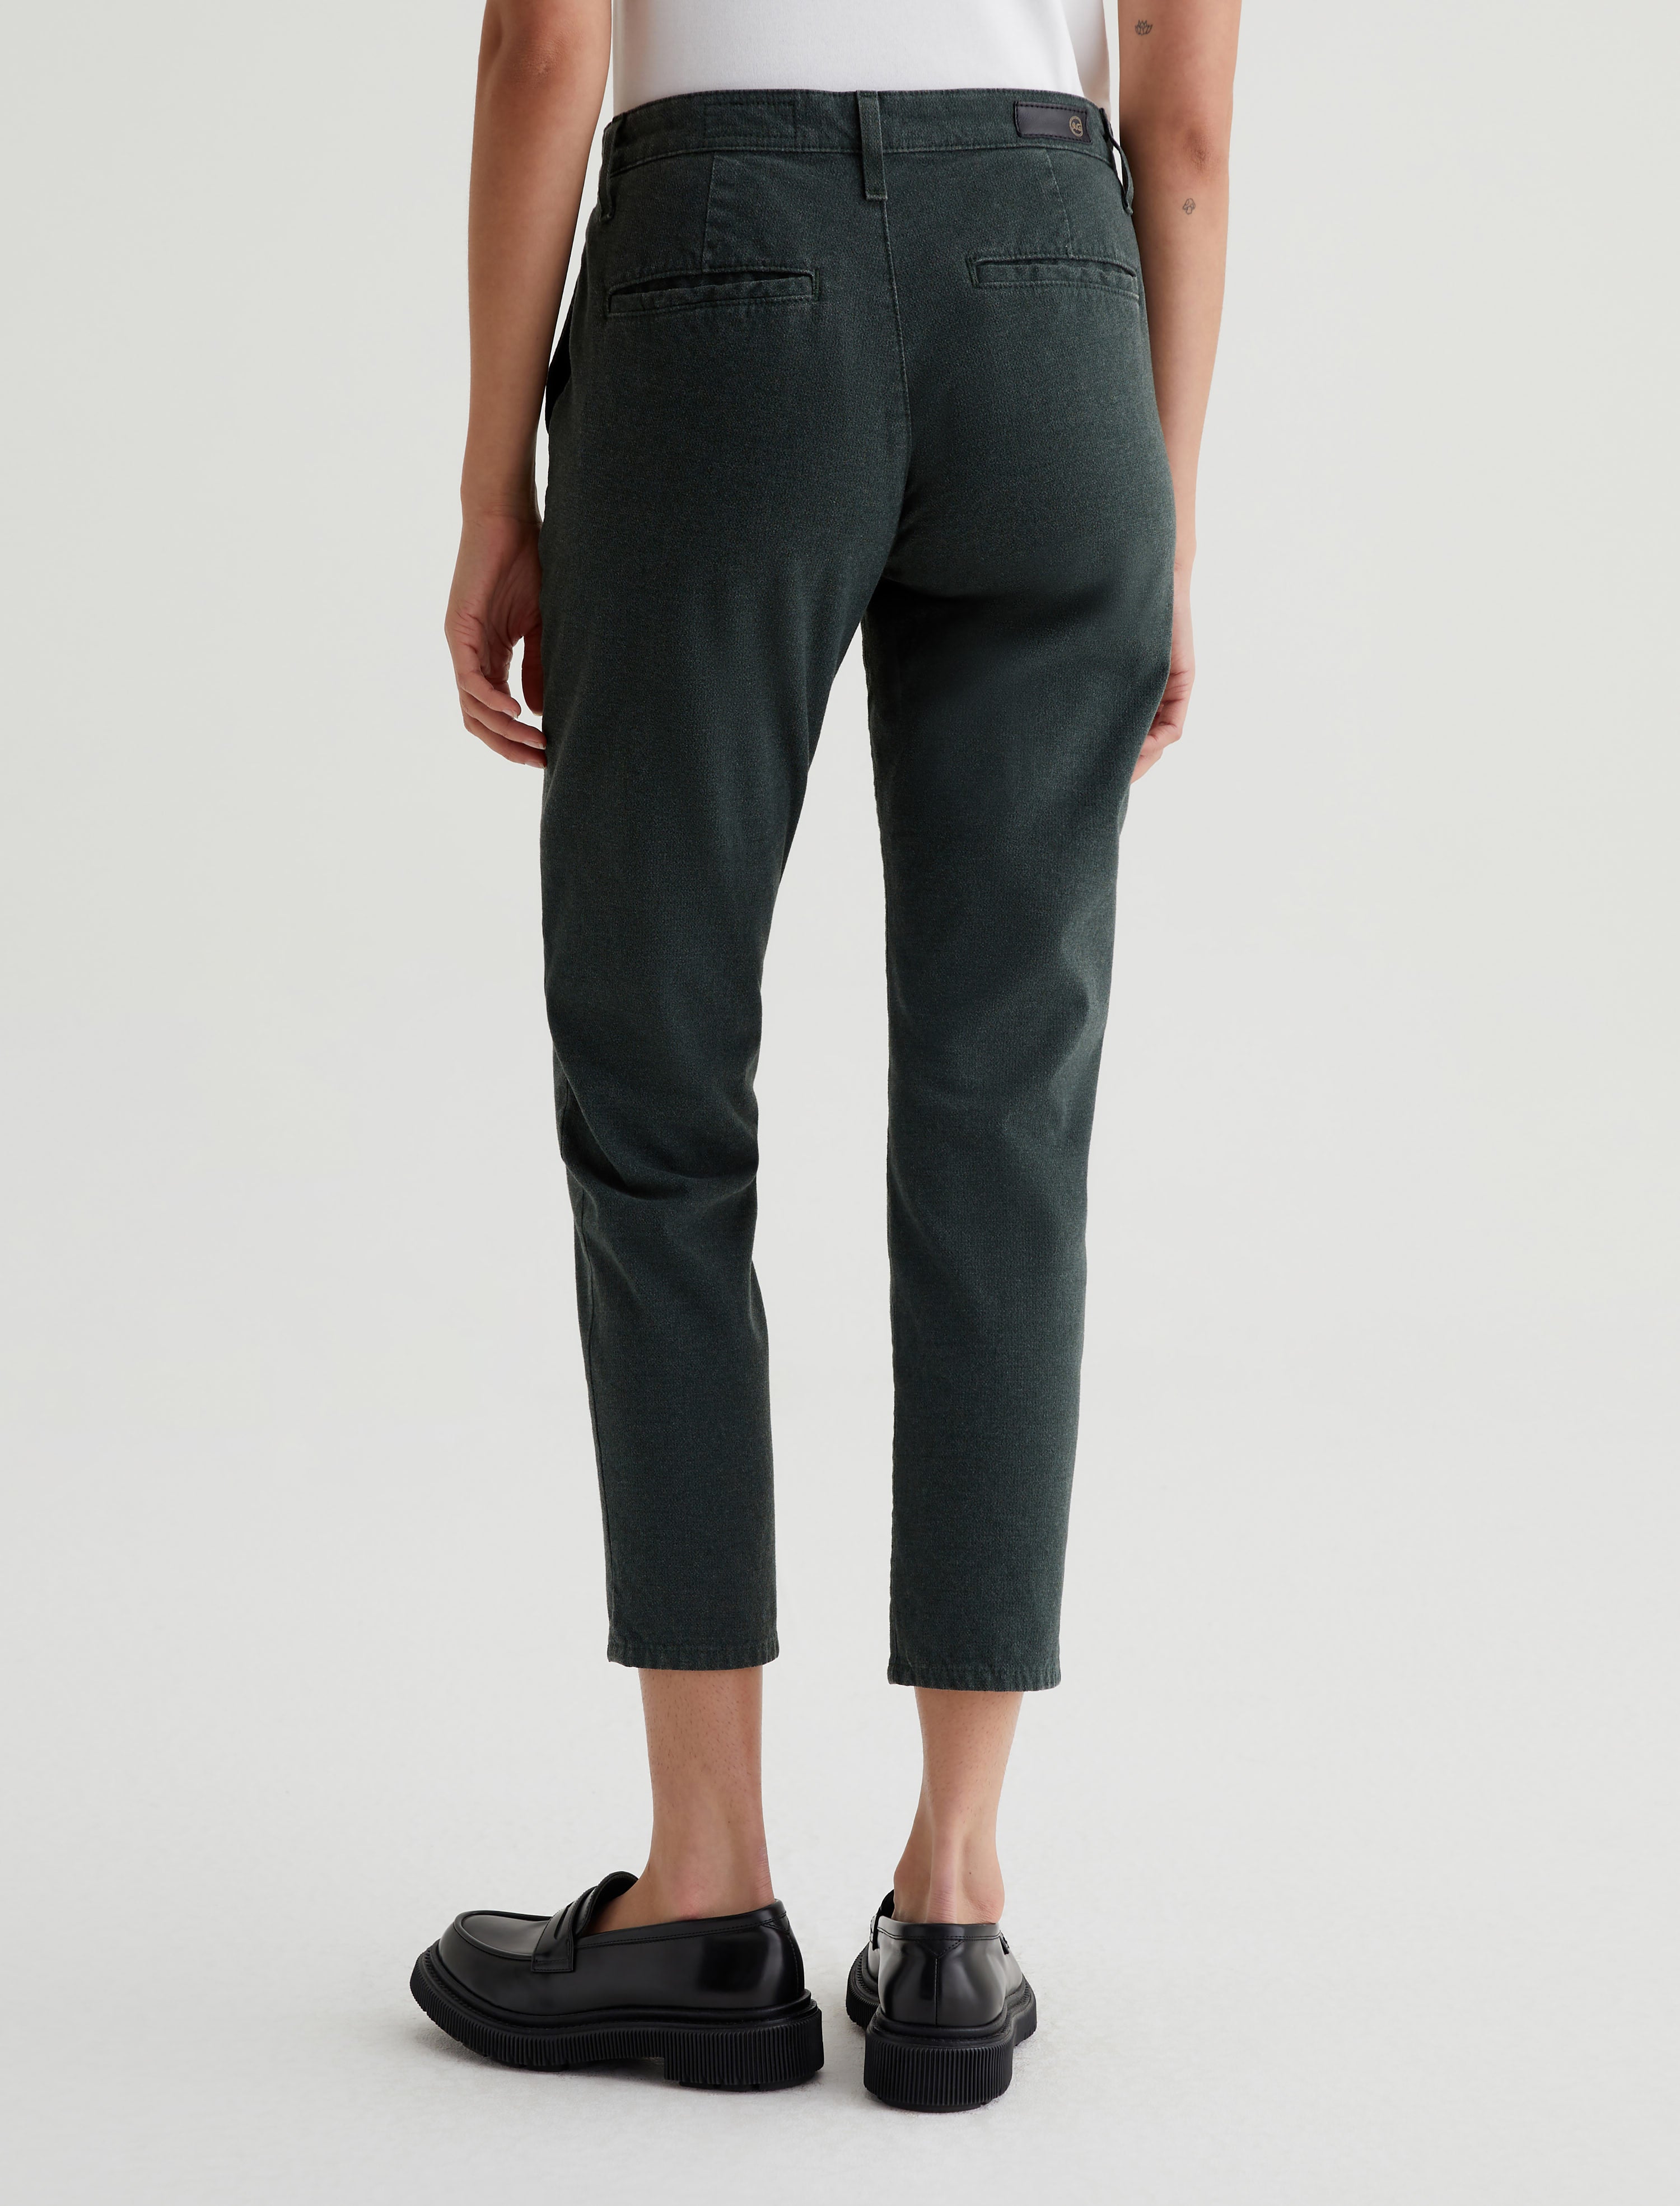 Womens Caden Blue Note at AG Jeans Official Store